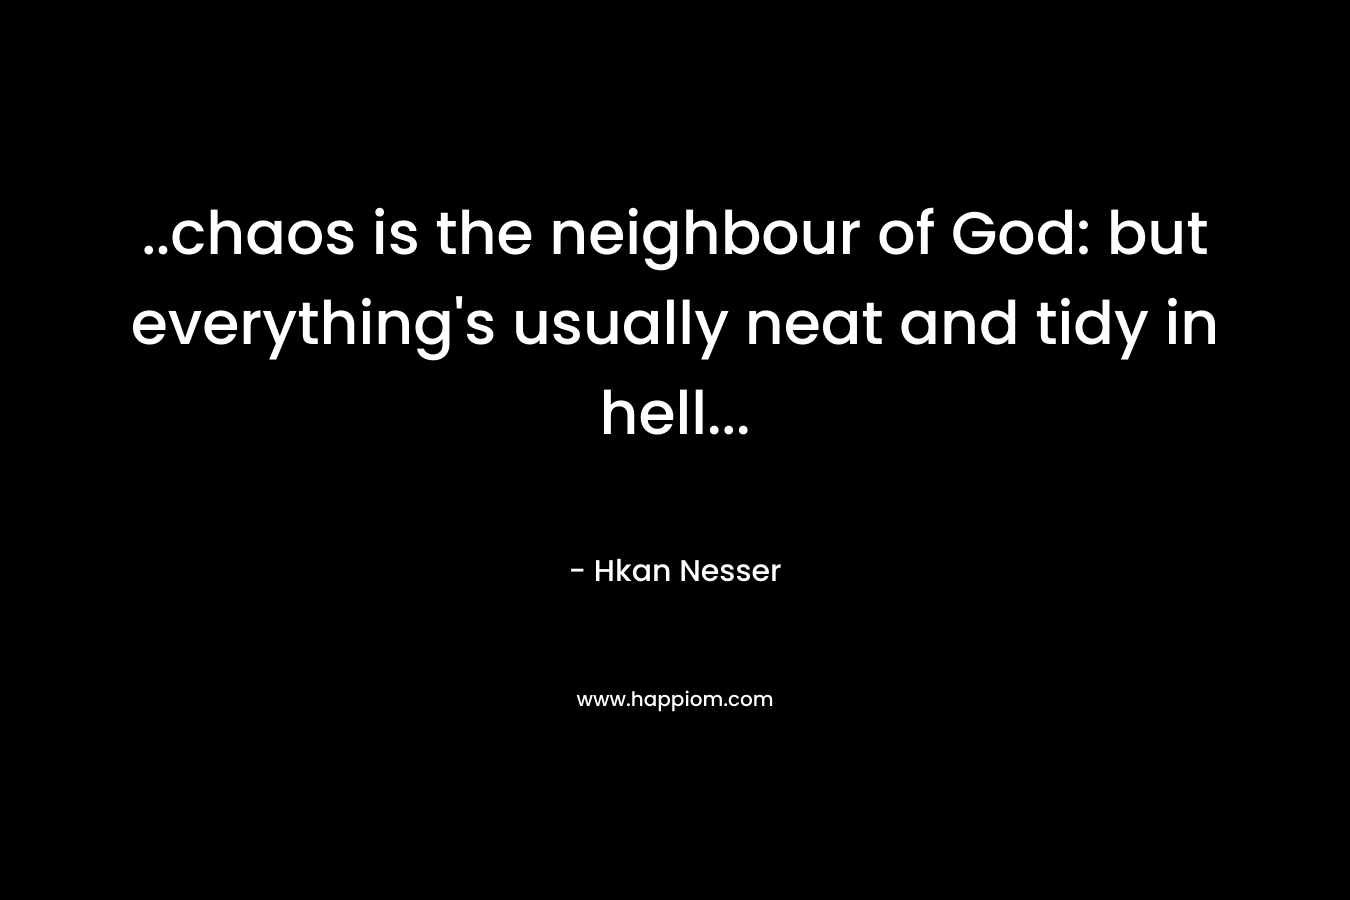 ..chaos is the neighbour of God: but everything's usually neat and tidy in hell...